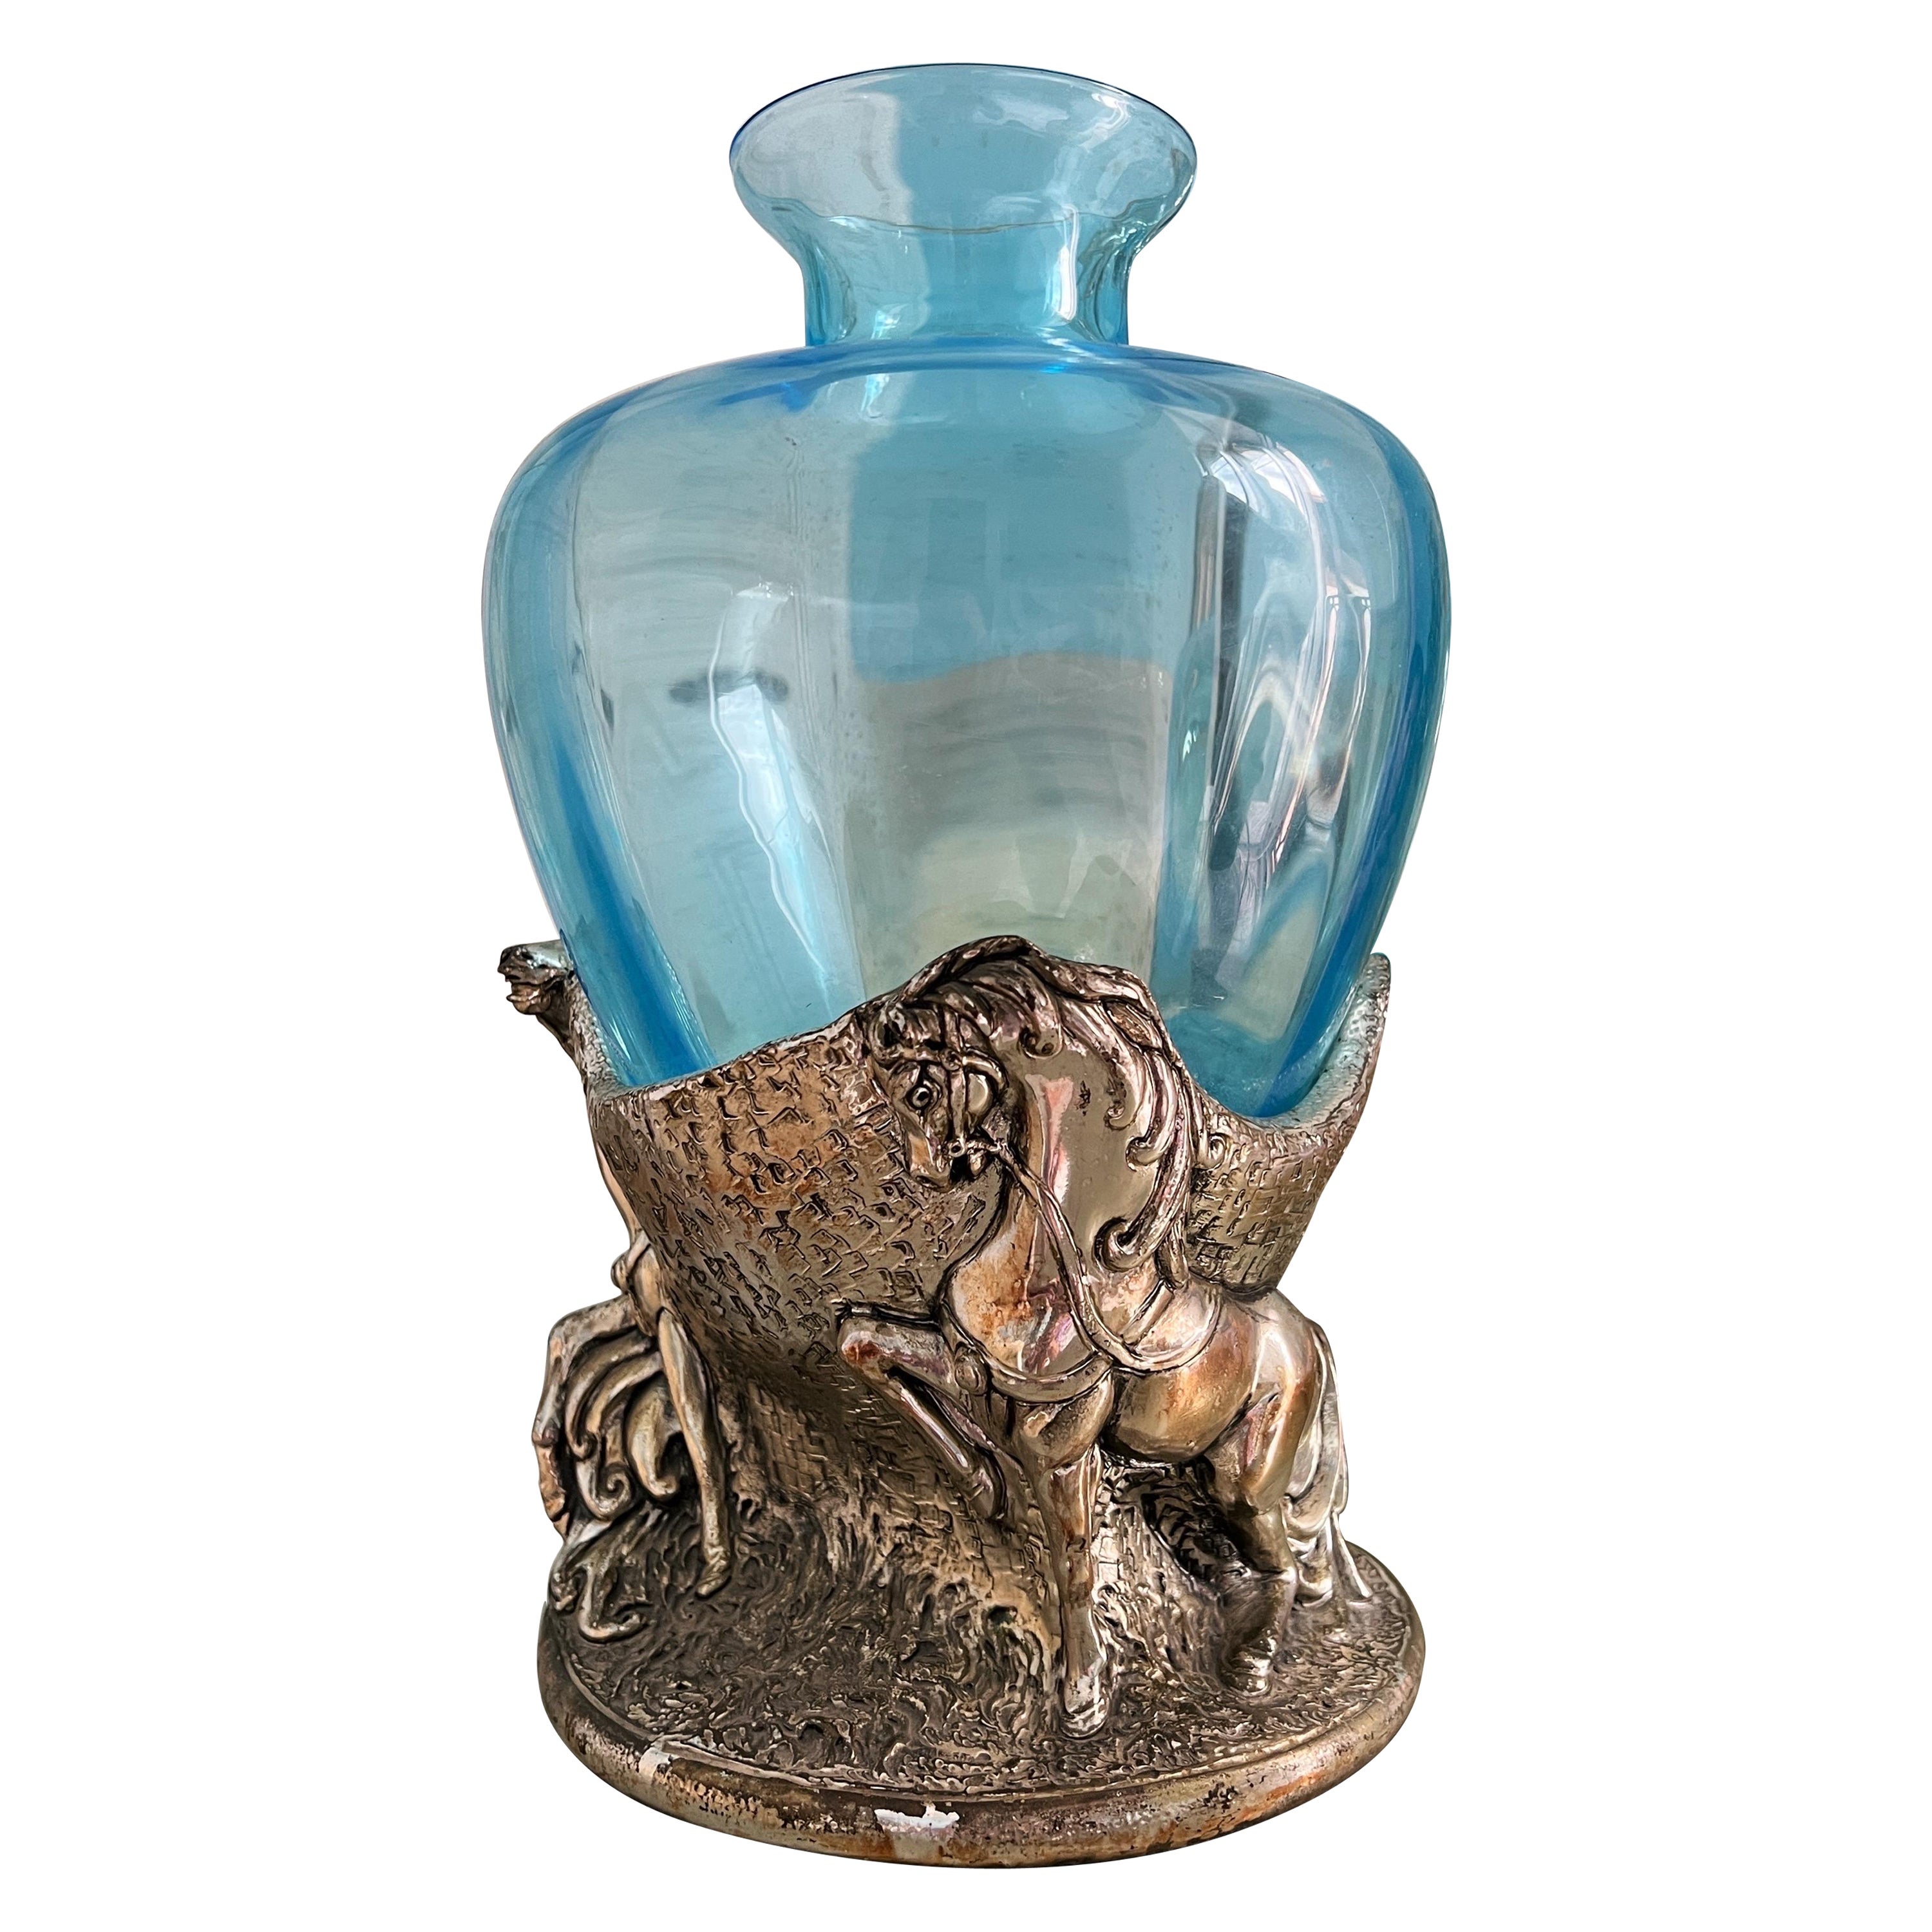 Mid-century modern Murano glass vase adorned with an sculpture featuring horses For Sale